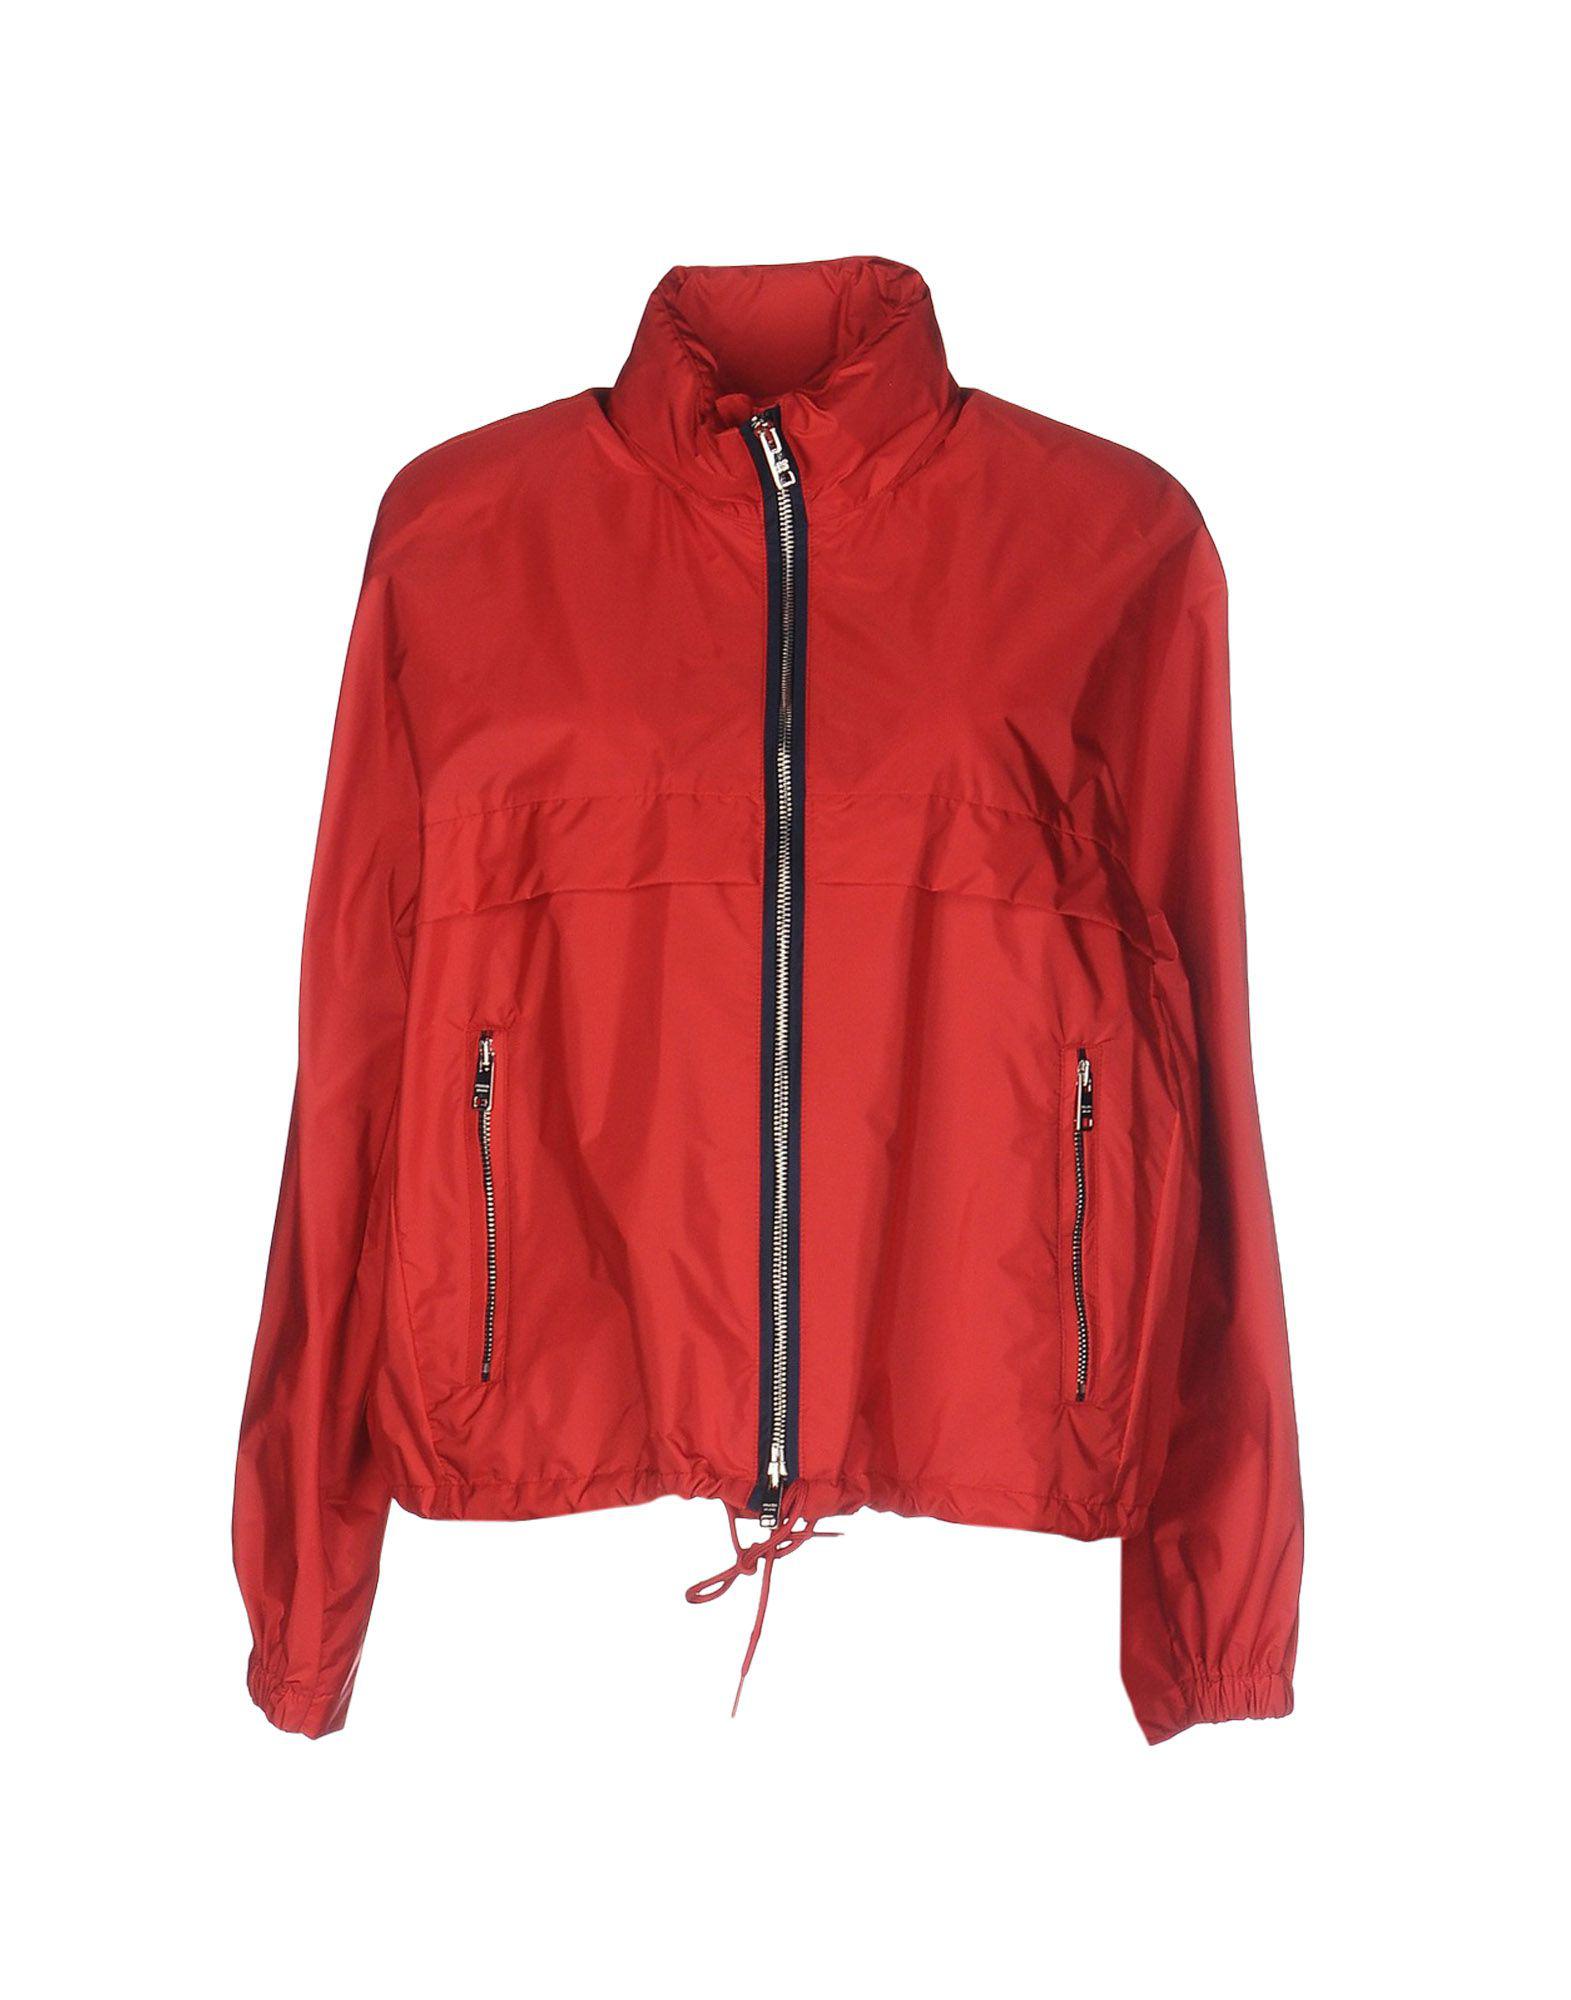 Prada Synthetic Jacket in Red - Lyst